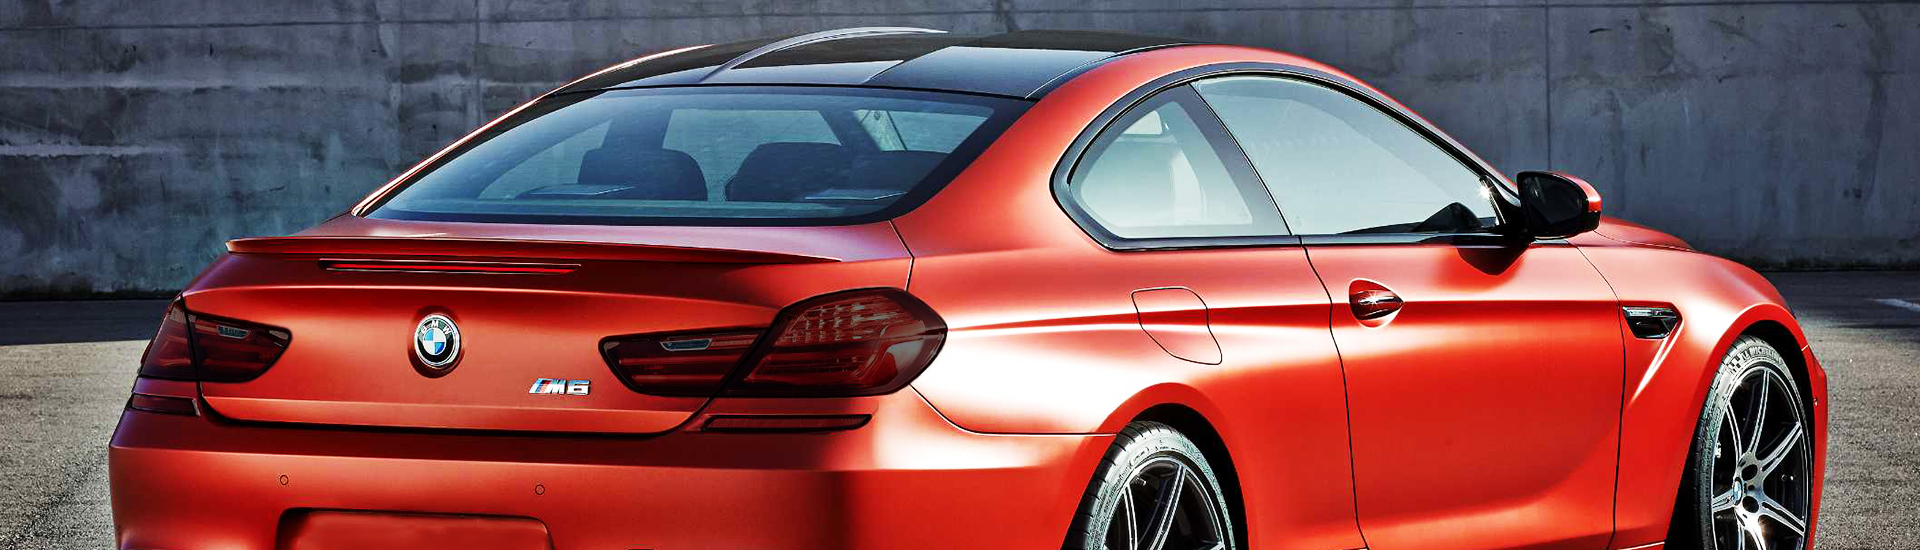 BMW M6 Tail Light Tint Covers